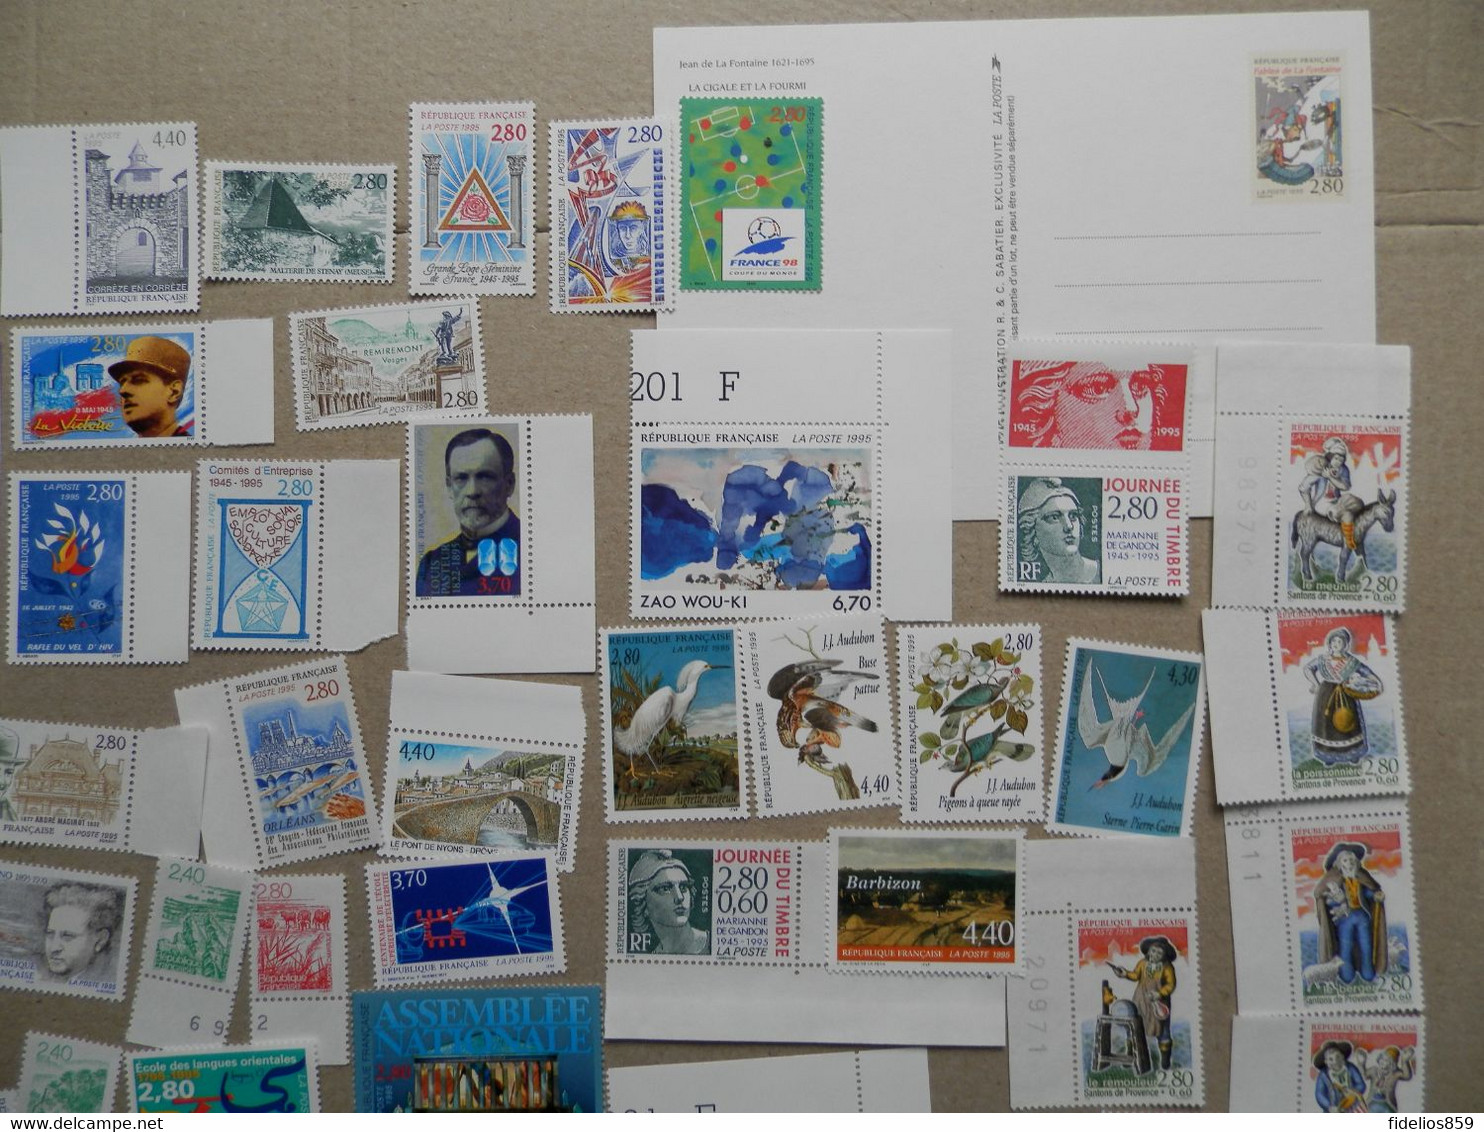 FRANCE ANNEE COMPLETE 1995 SOIT 61 TIMBRES ET 2 BLOCS NEUFS SANS CHARNIERE NI TRACE QUALITE LUXE - 1990-1999